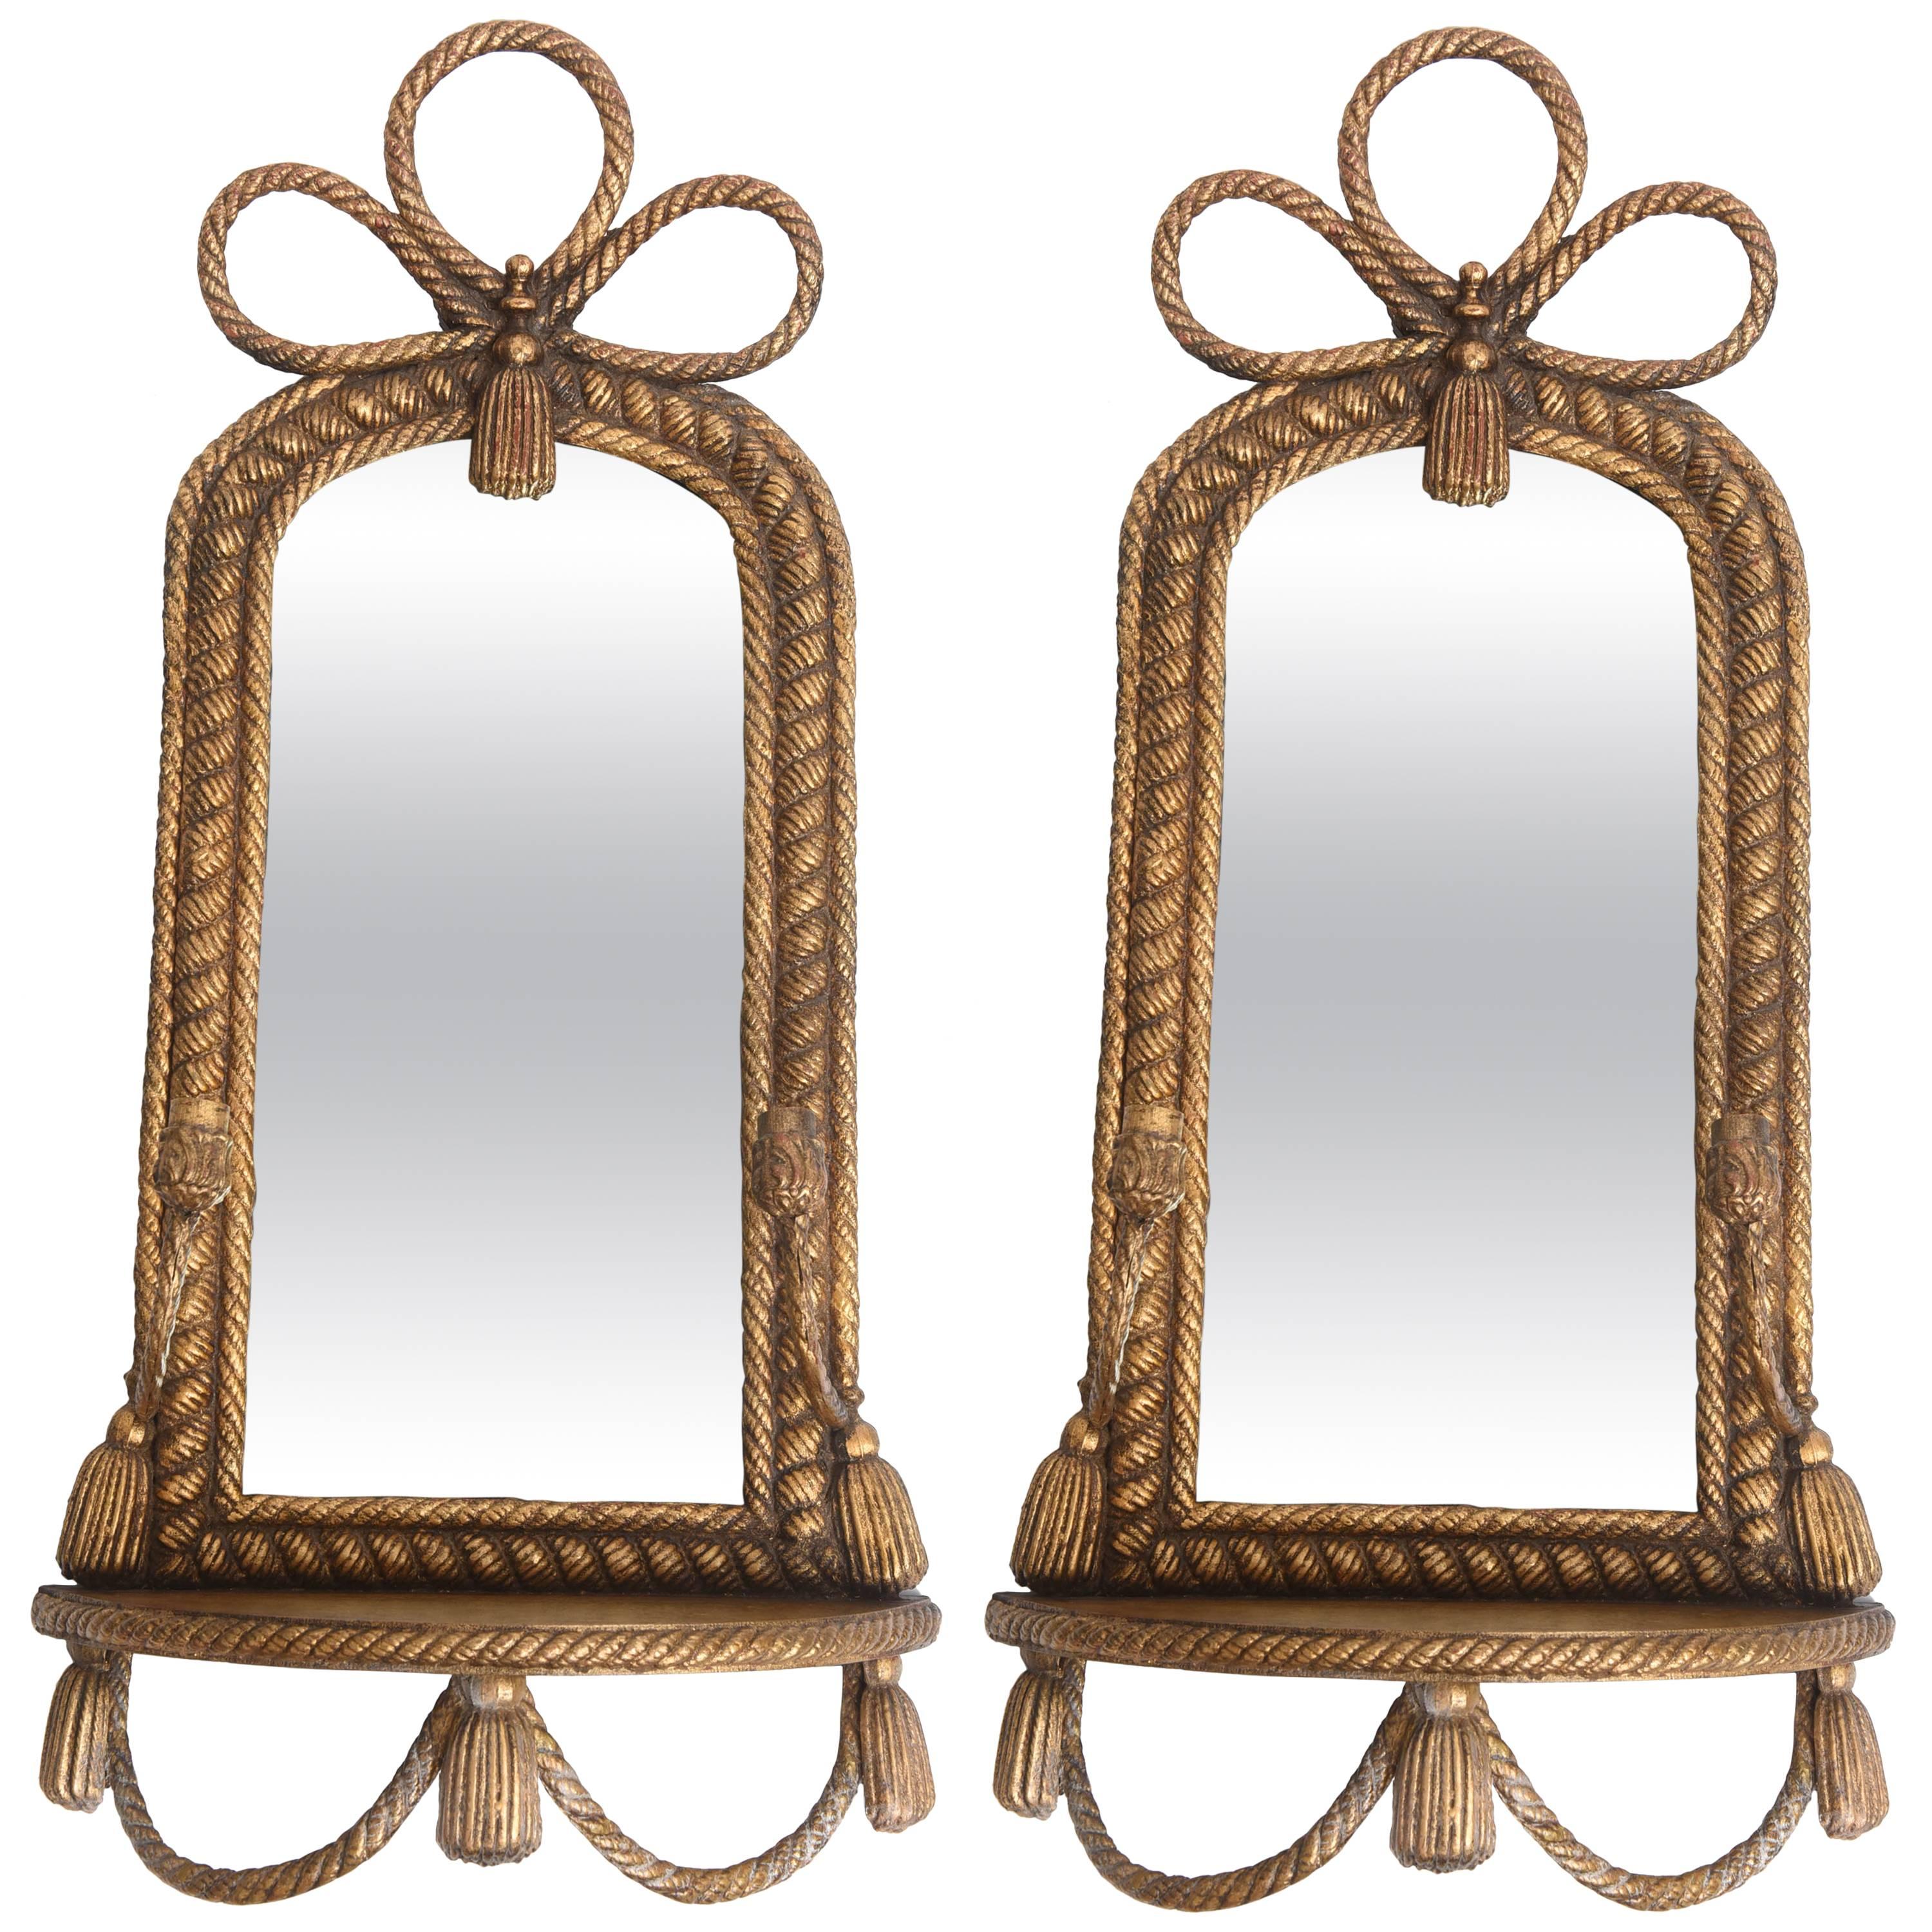 Pair of Roped Mirror Wall Sconces